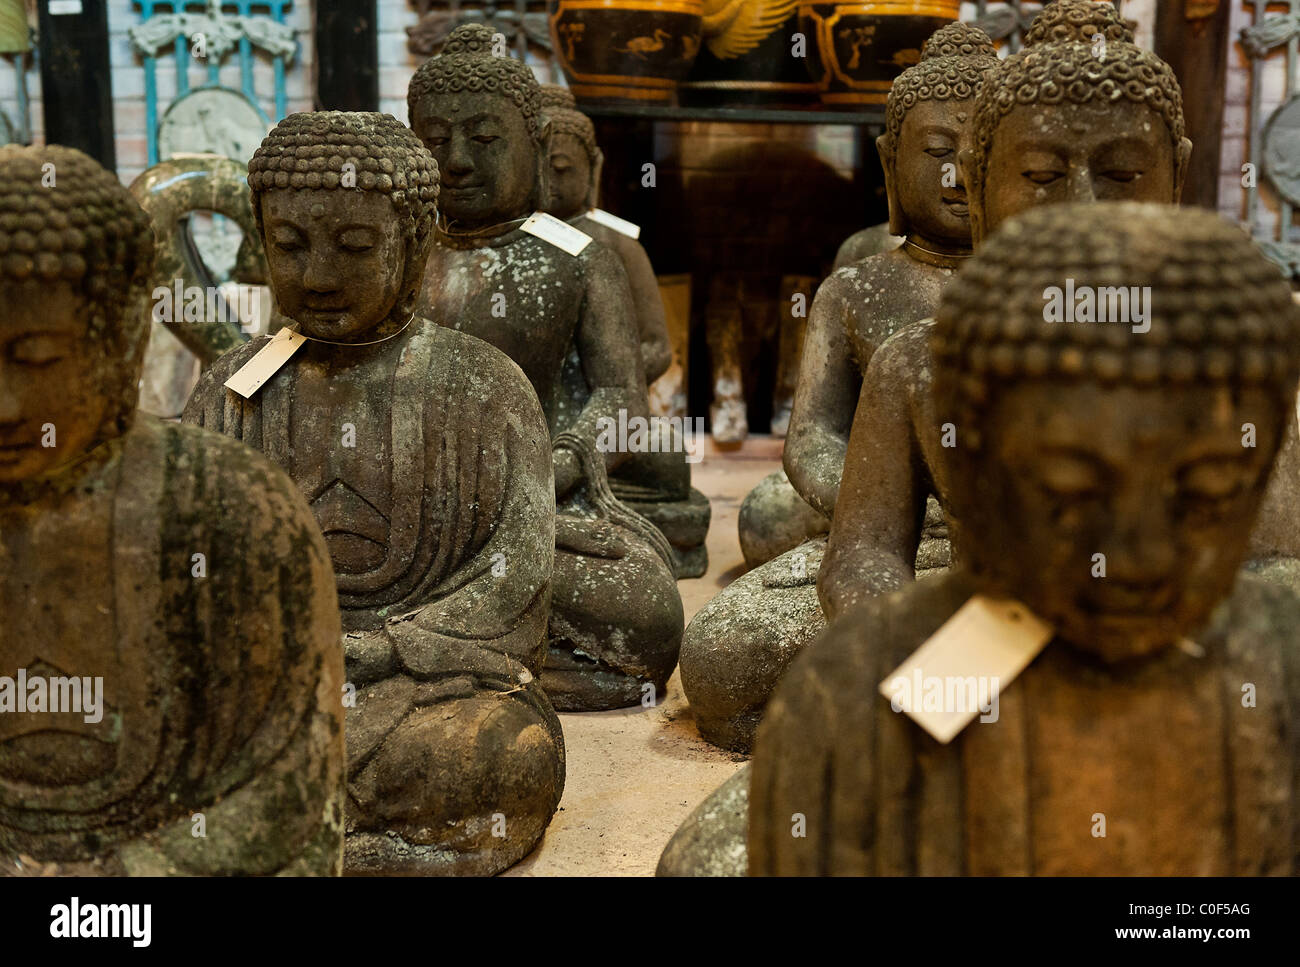 Buddha statues in an asian import store. Stock Photo